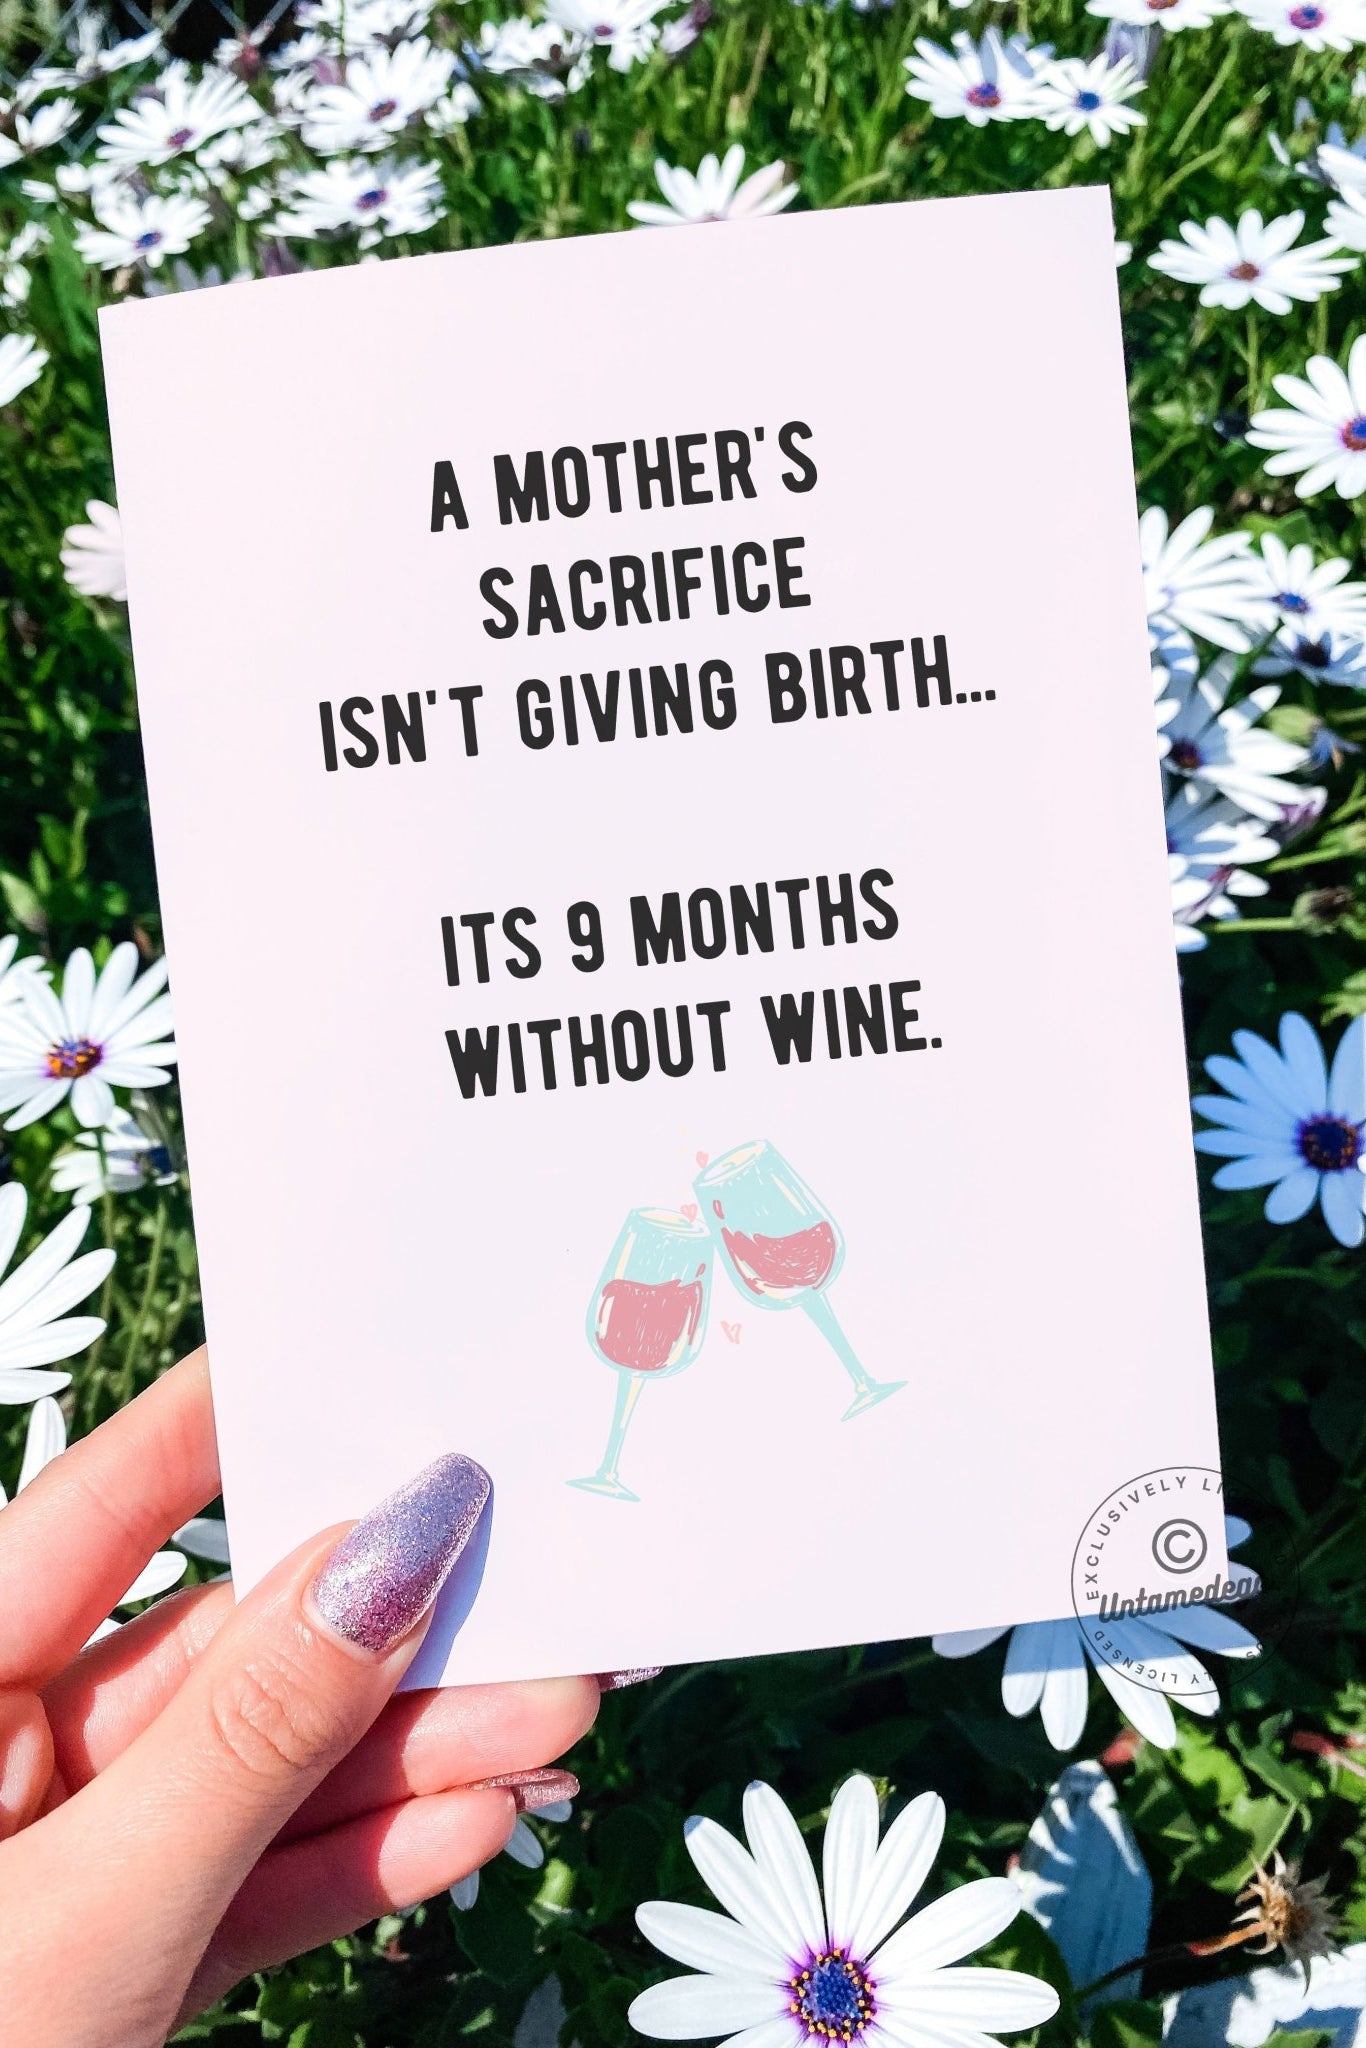 A Mother's Sacrifice Isn't Giving Birth It's 9 Months Without Wine Greeting Card - UntamedEgo LLC.